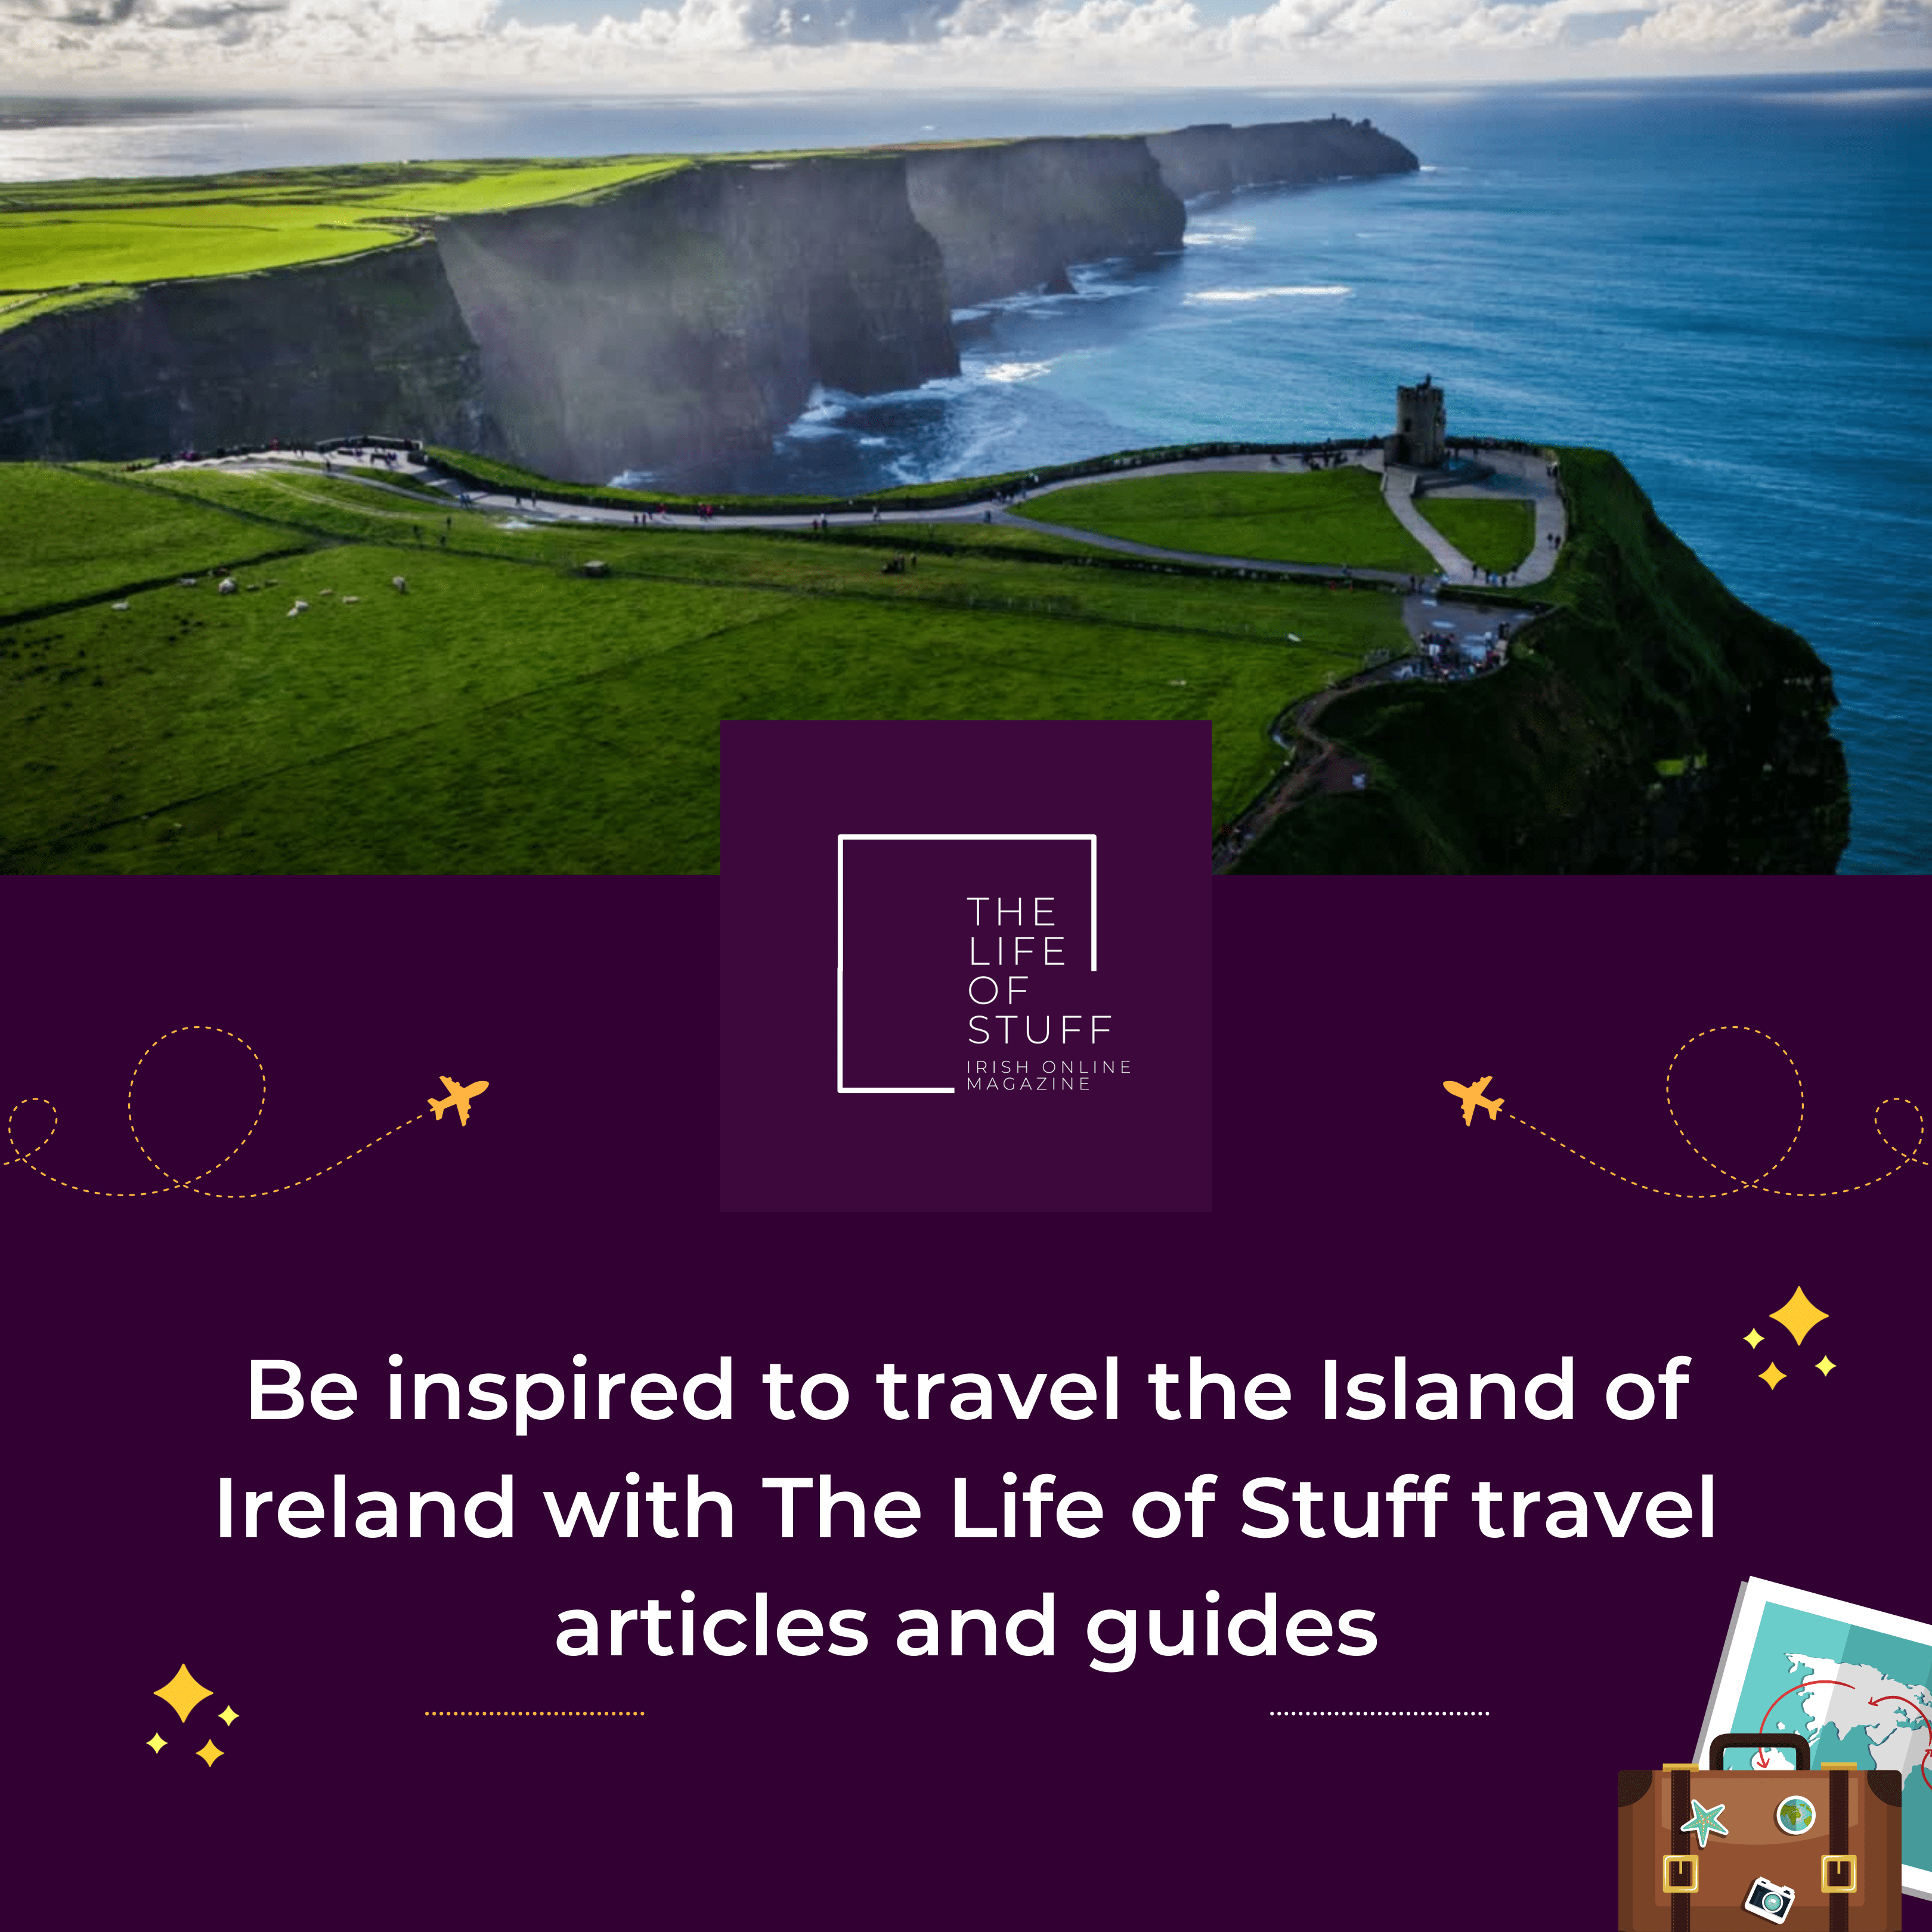 The Life of Stuff. - Travel the Island of Ireland - inspiration and guides